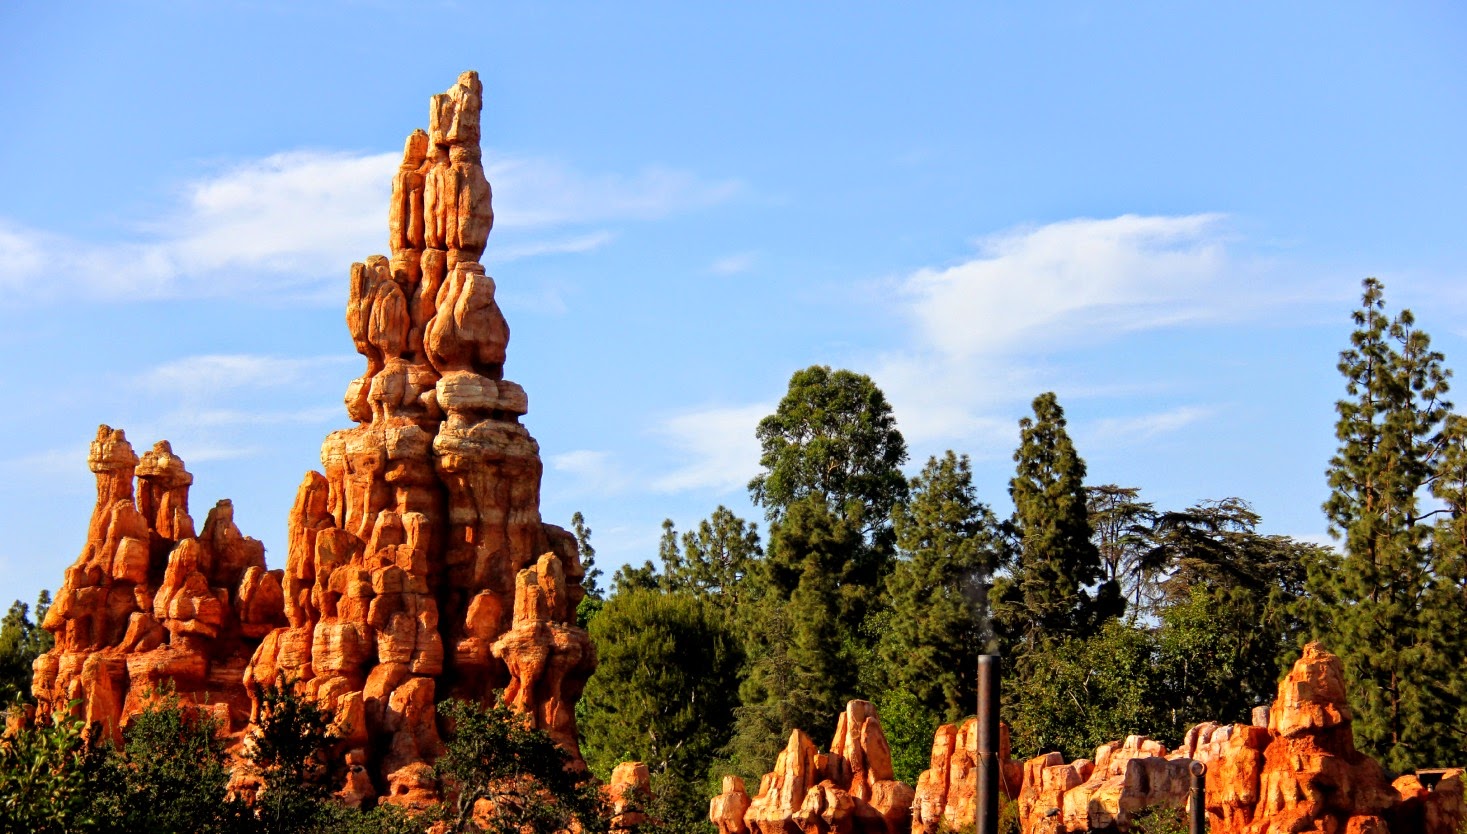 Disney Sisters Big Thunder Mountain Railroad 10 Facts You May Not Know About The Classic Disneyland Attraction